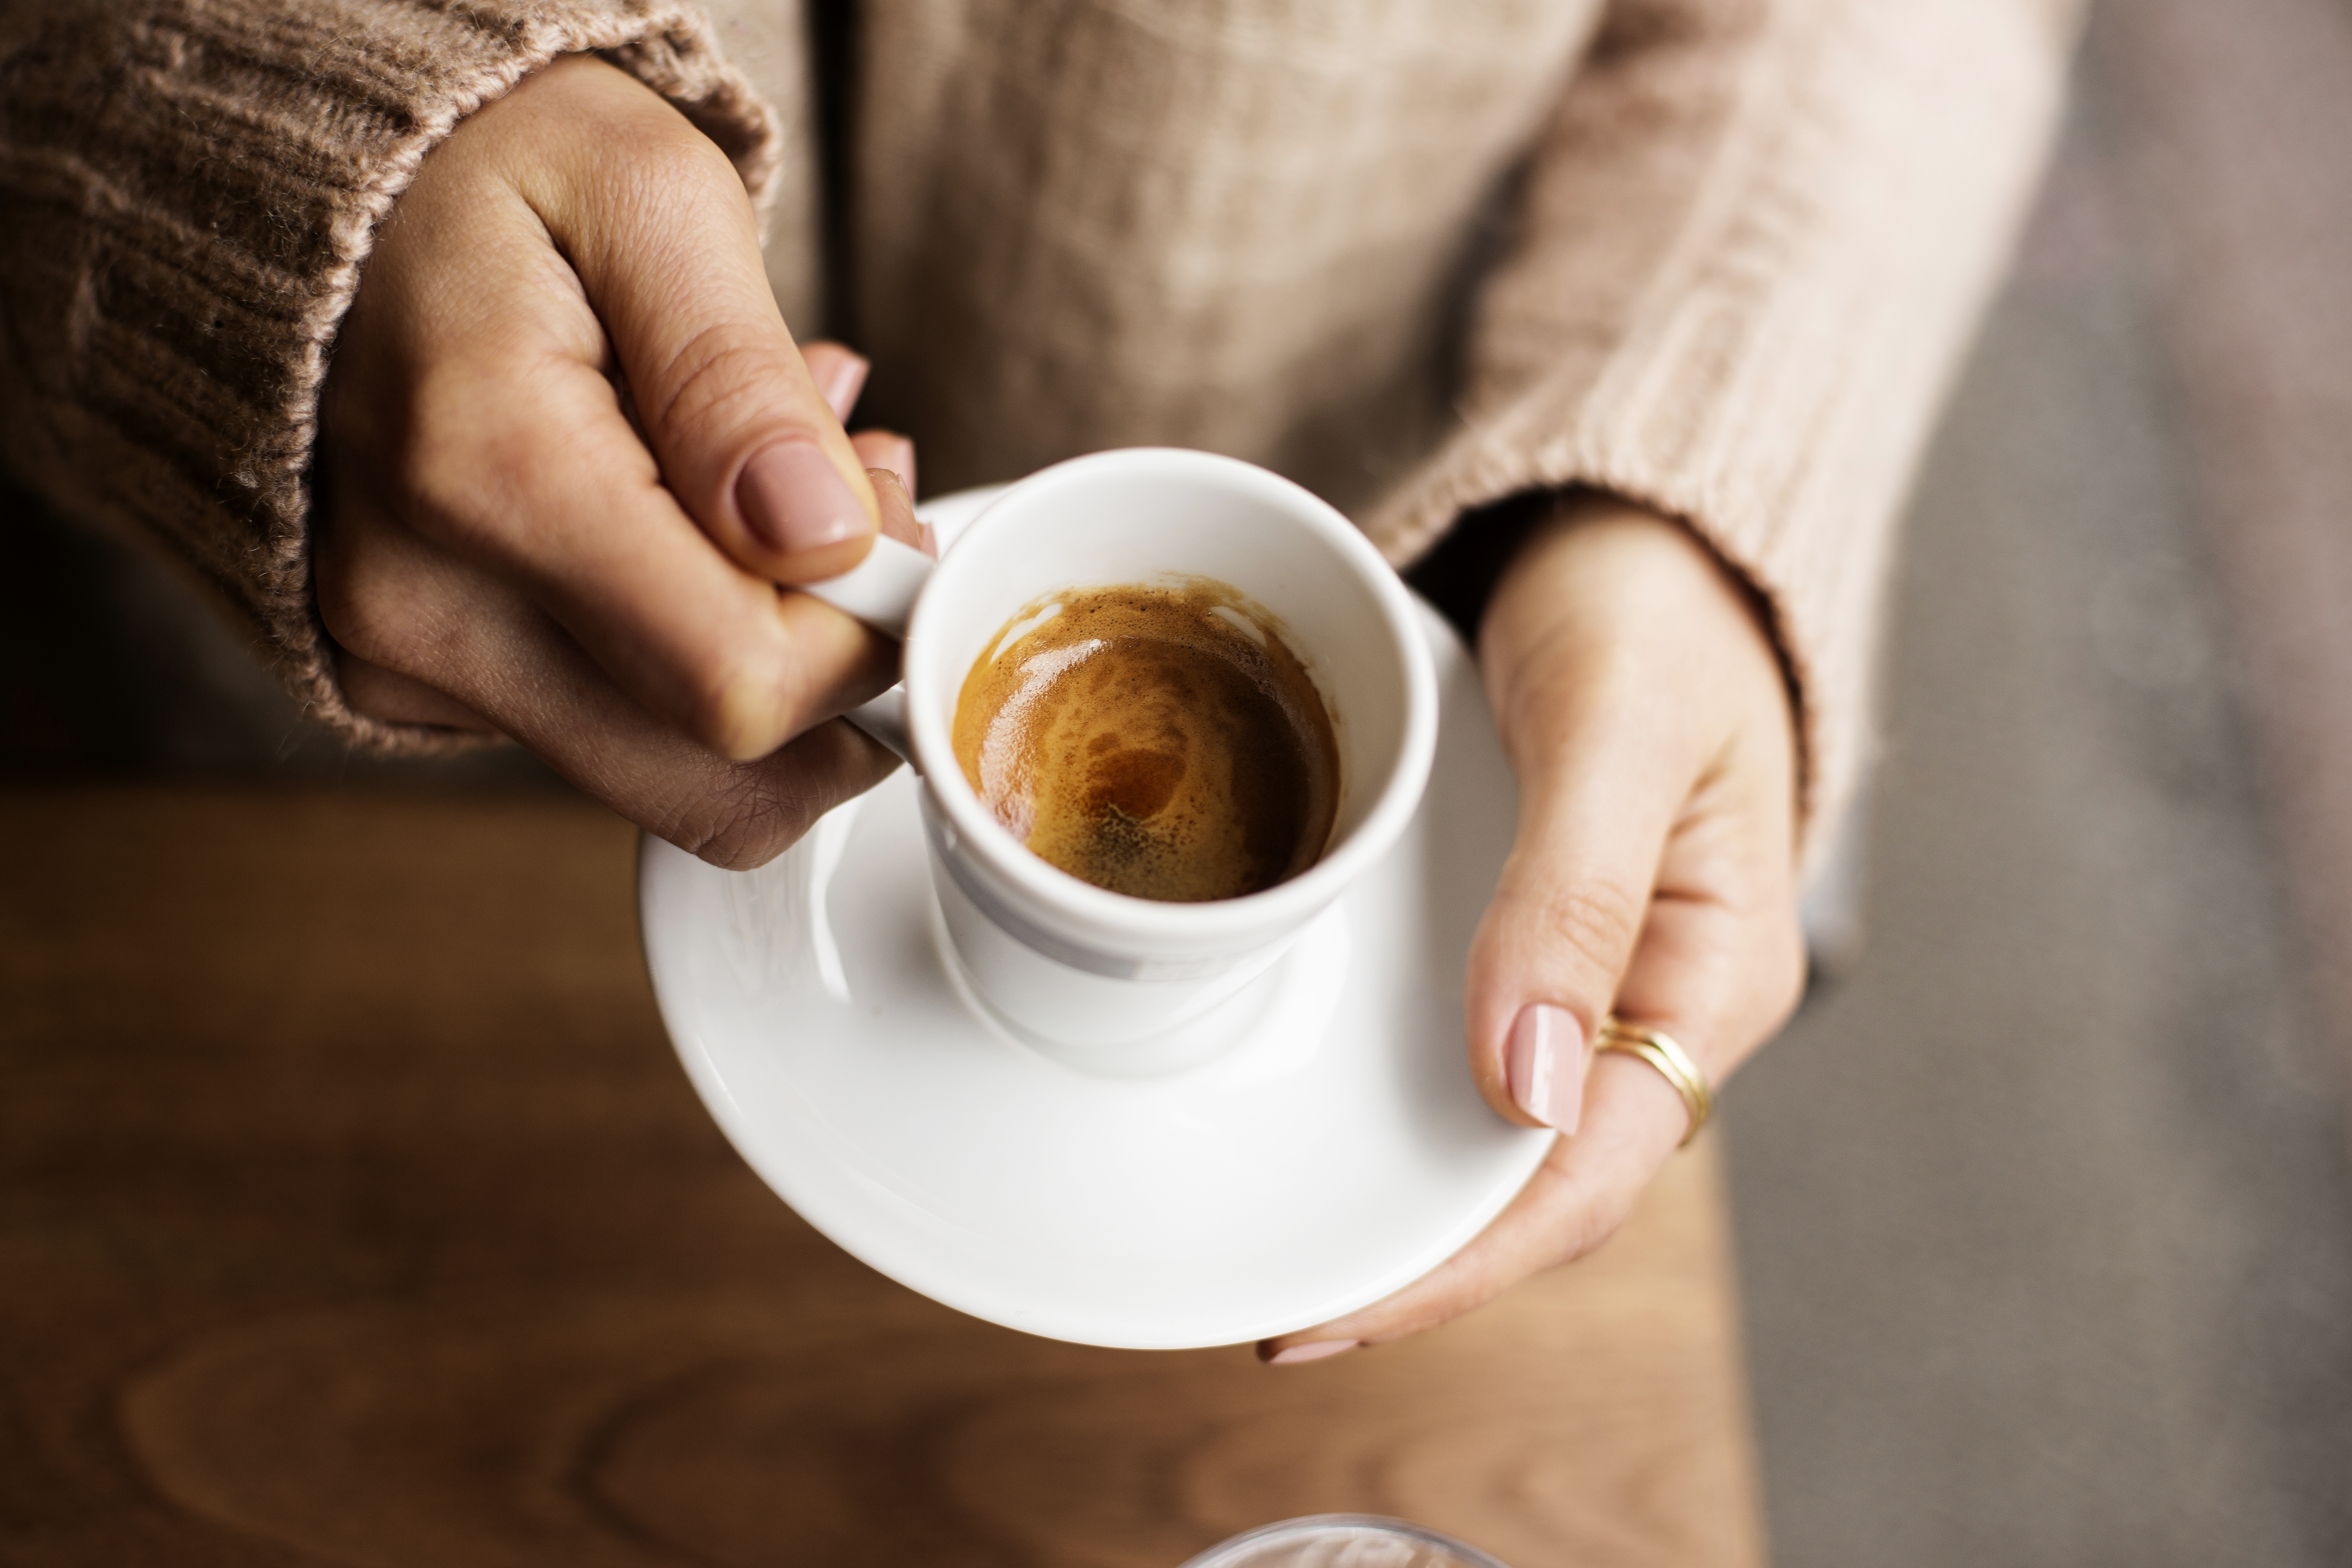 Artifact Every year Intention Why Coffee Can Cause Constipation, and What to Do About It | livestrong